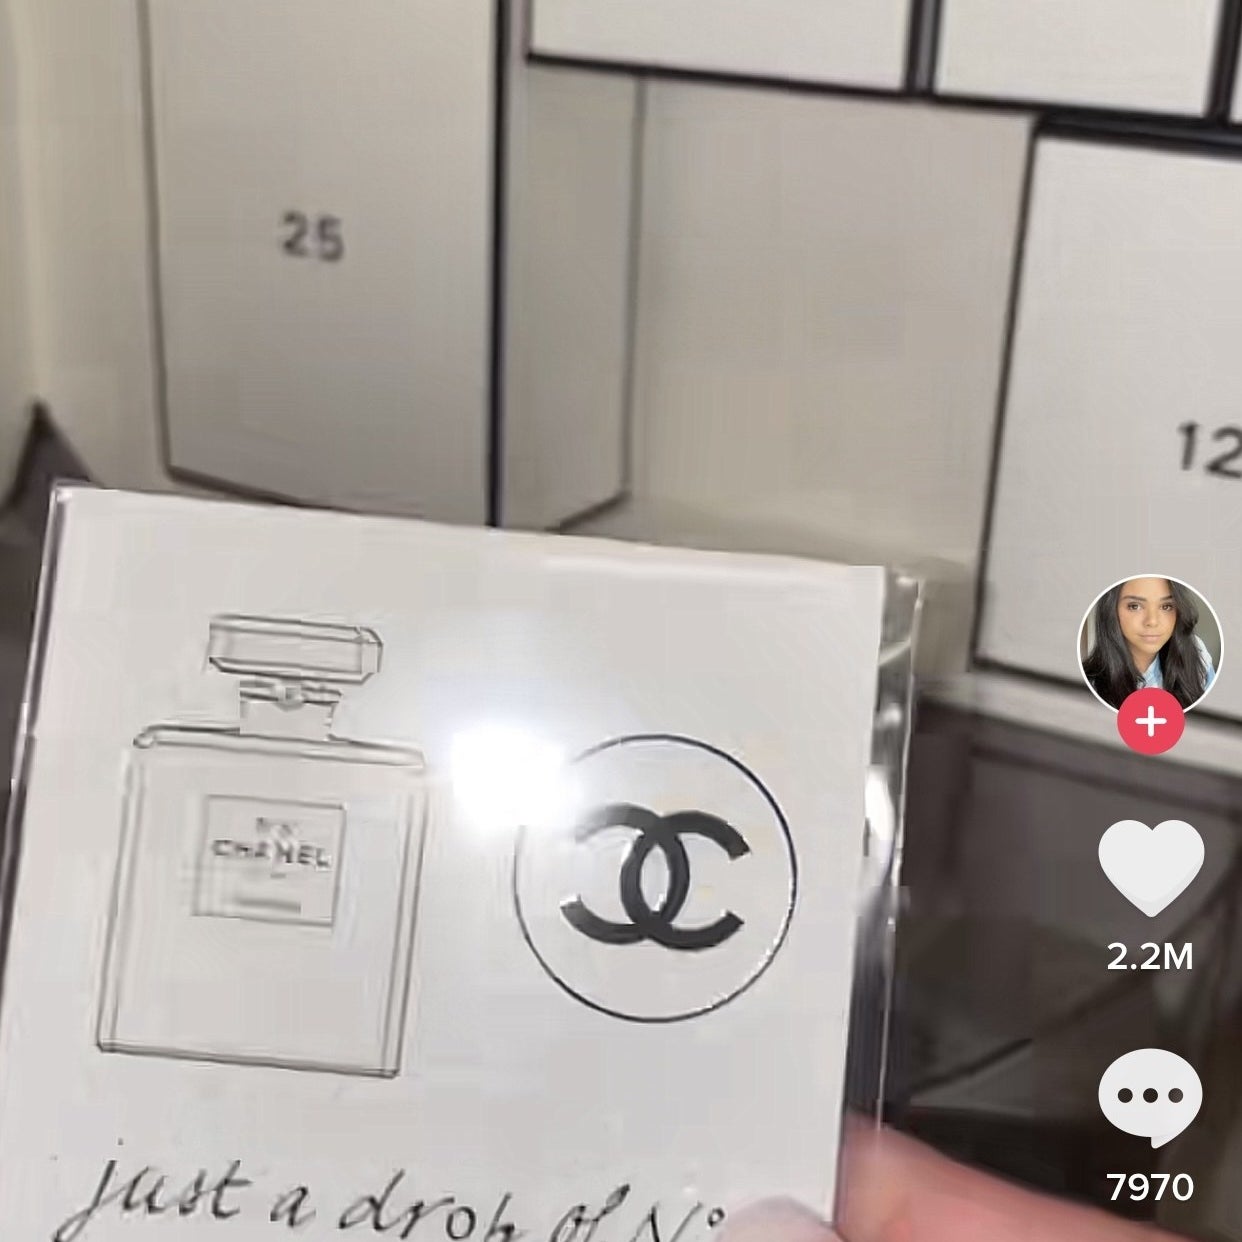 The $825 Chanel Advent Calendar Is Getting Dragged On TikTok